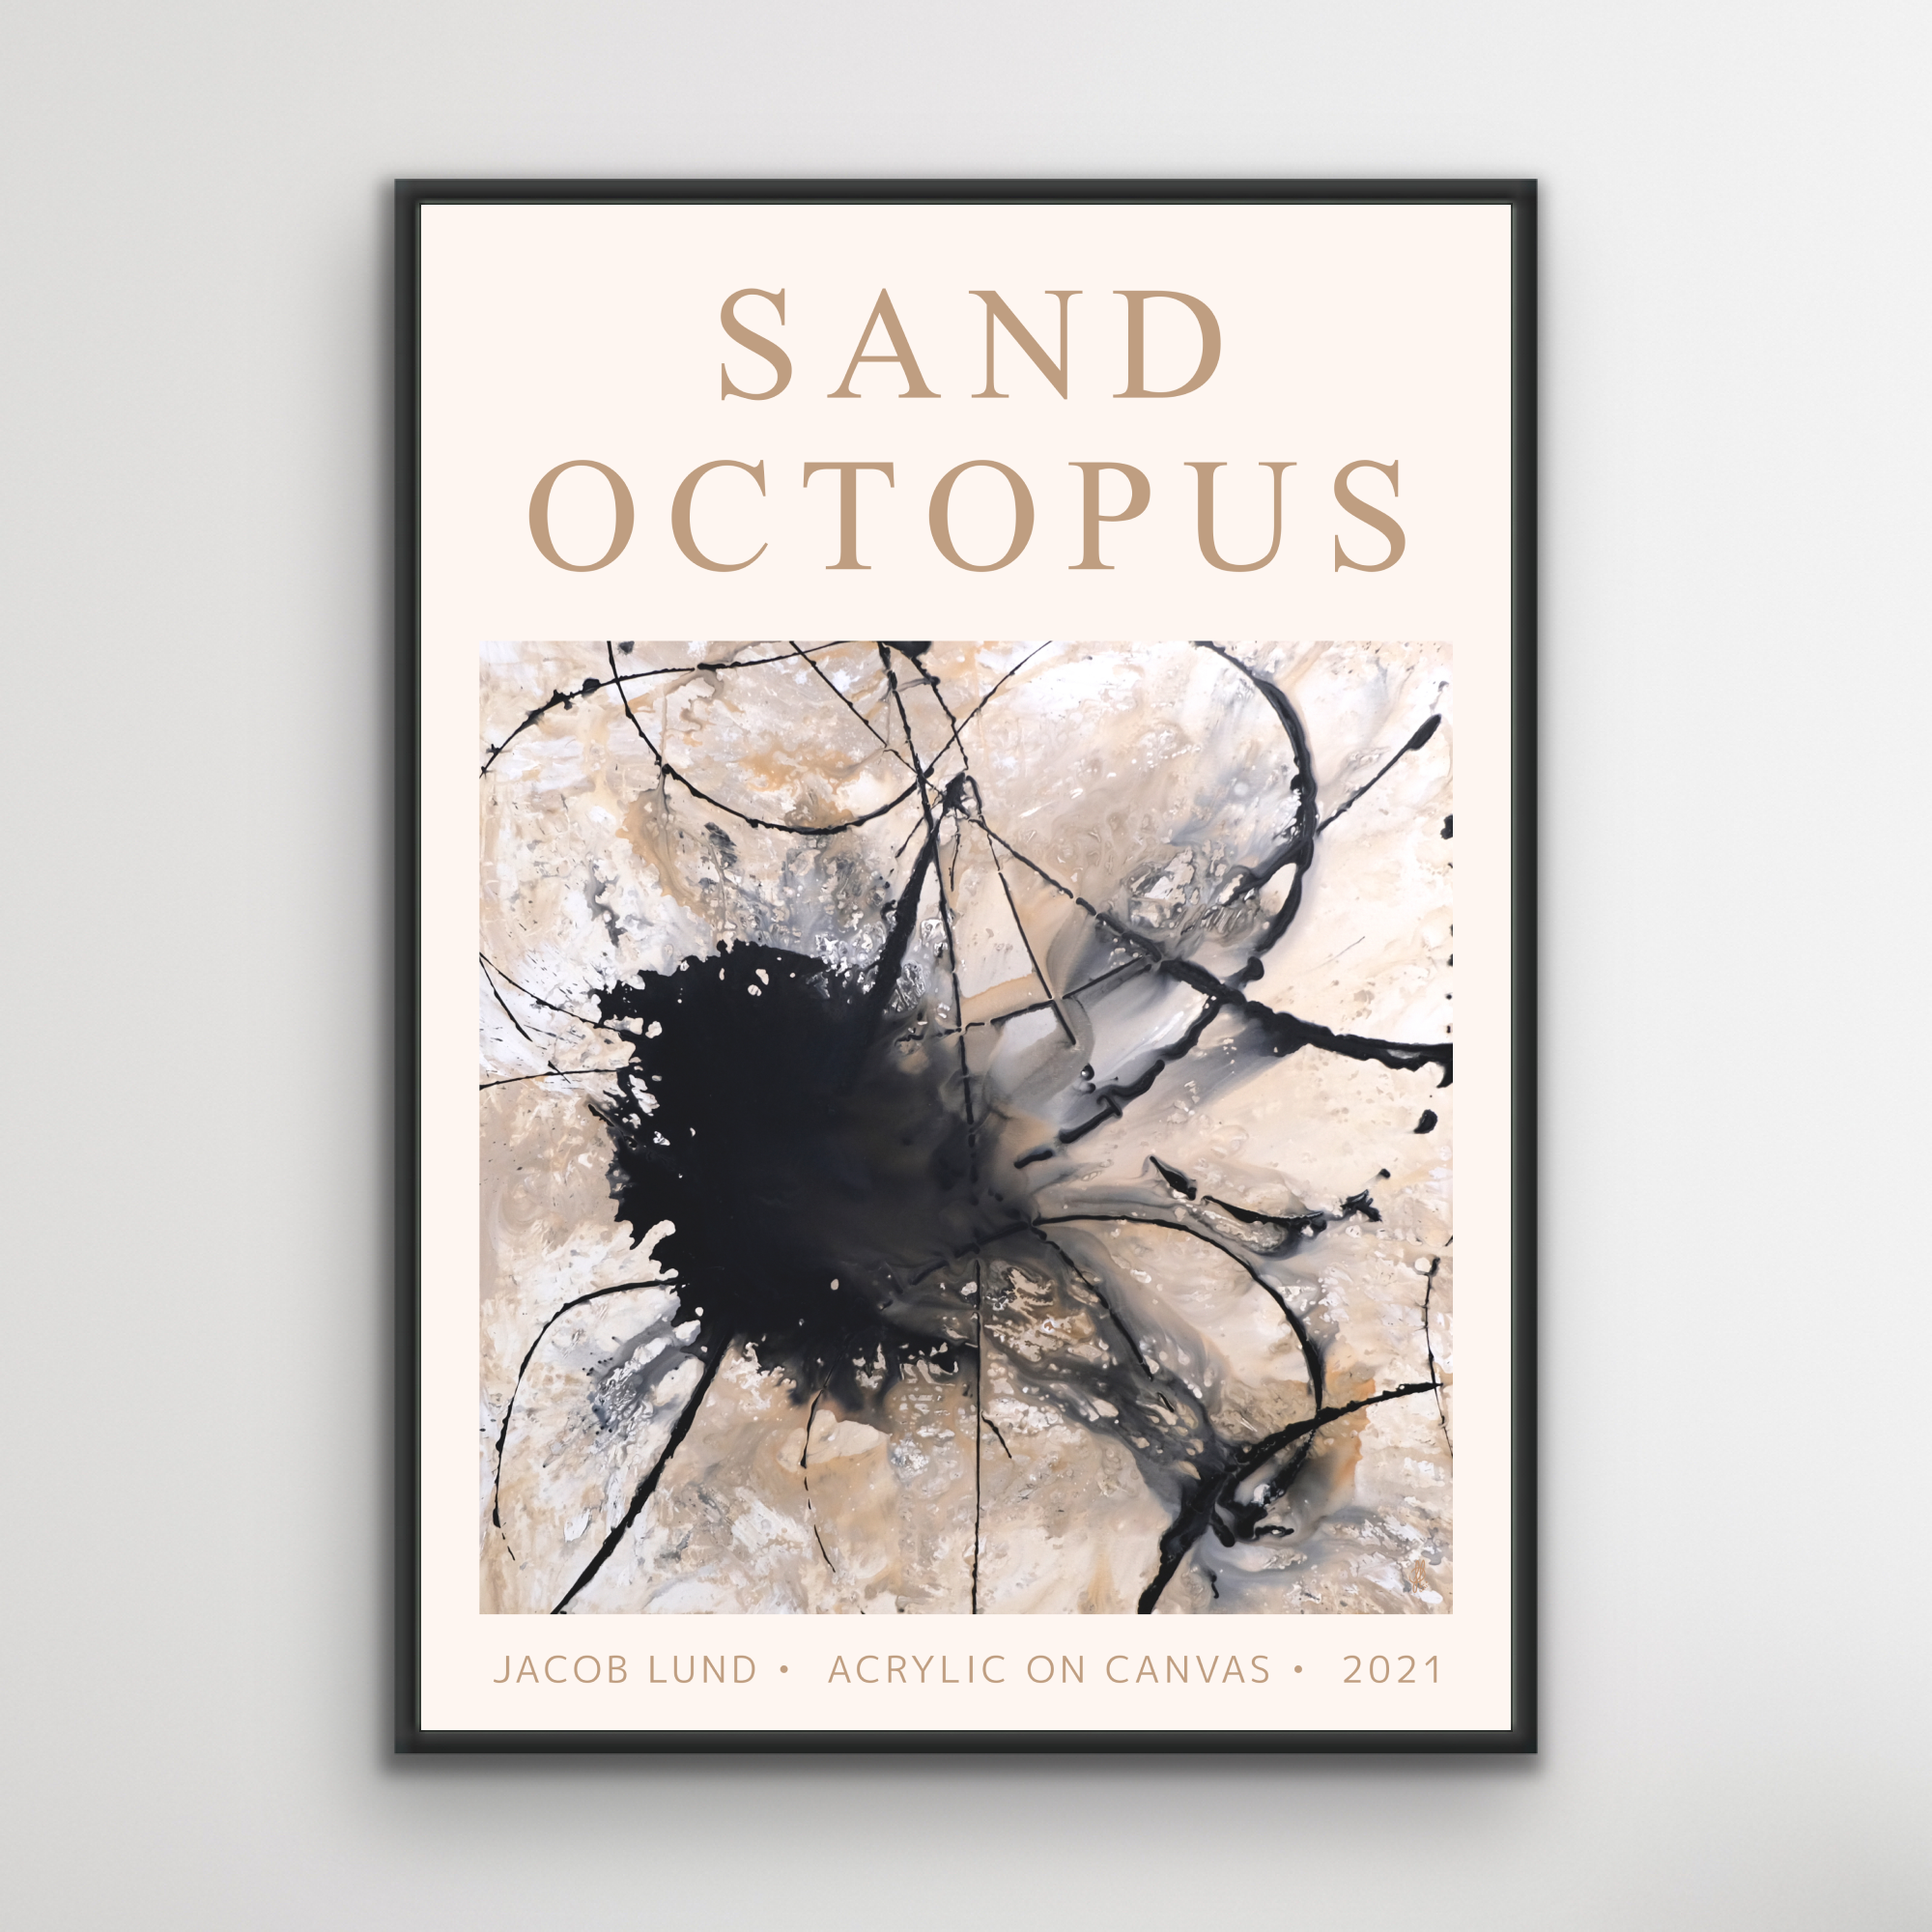 Poster: "Sand Octopus"